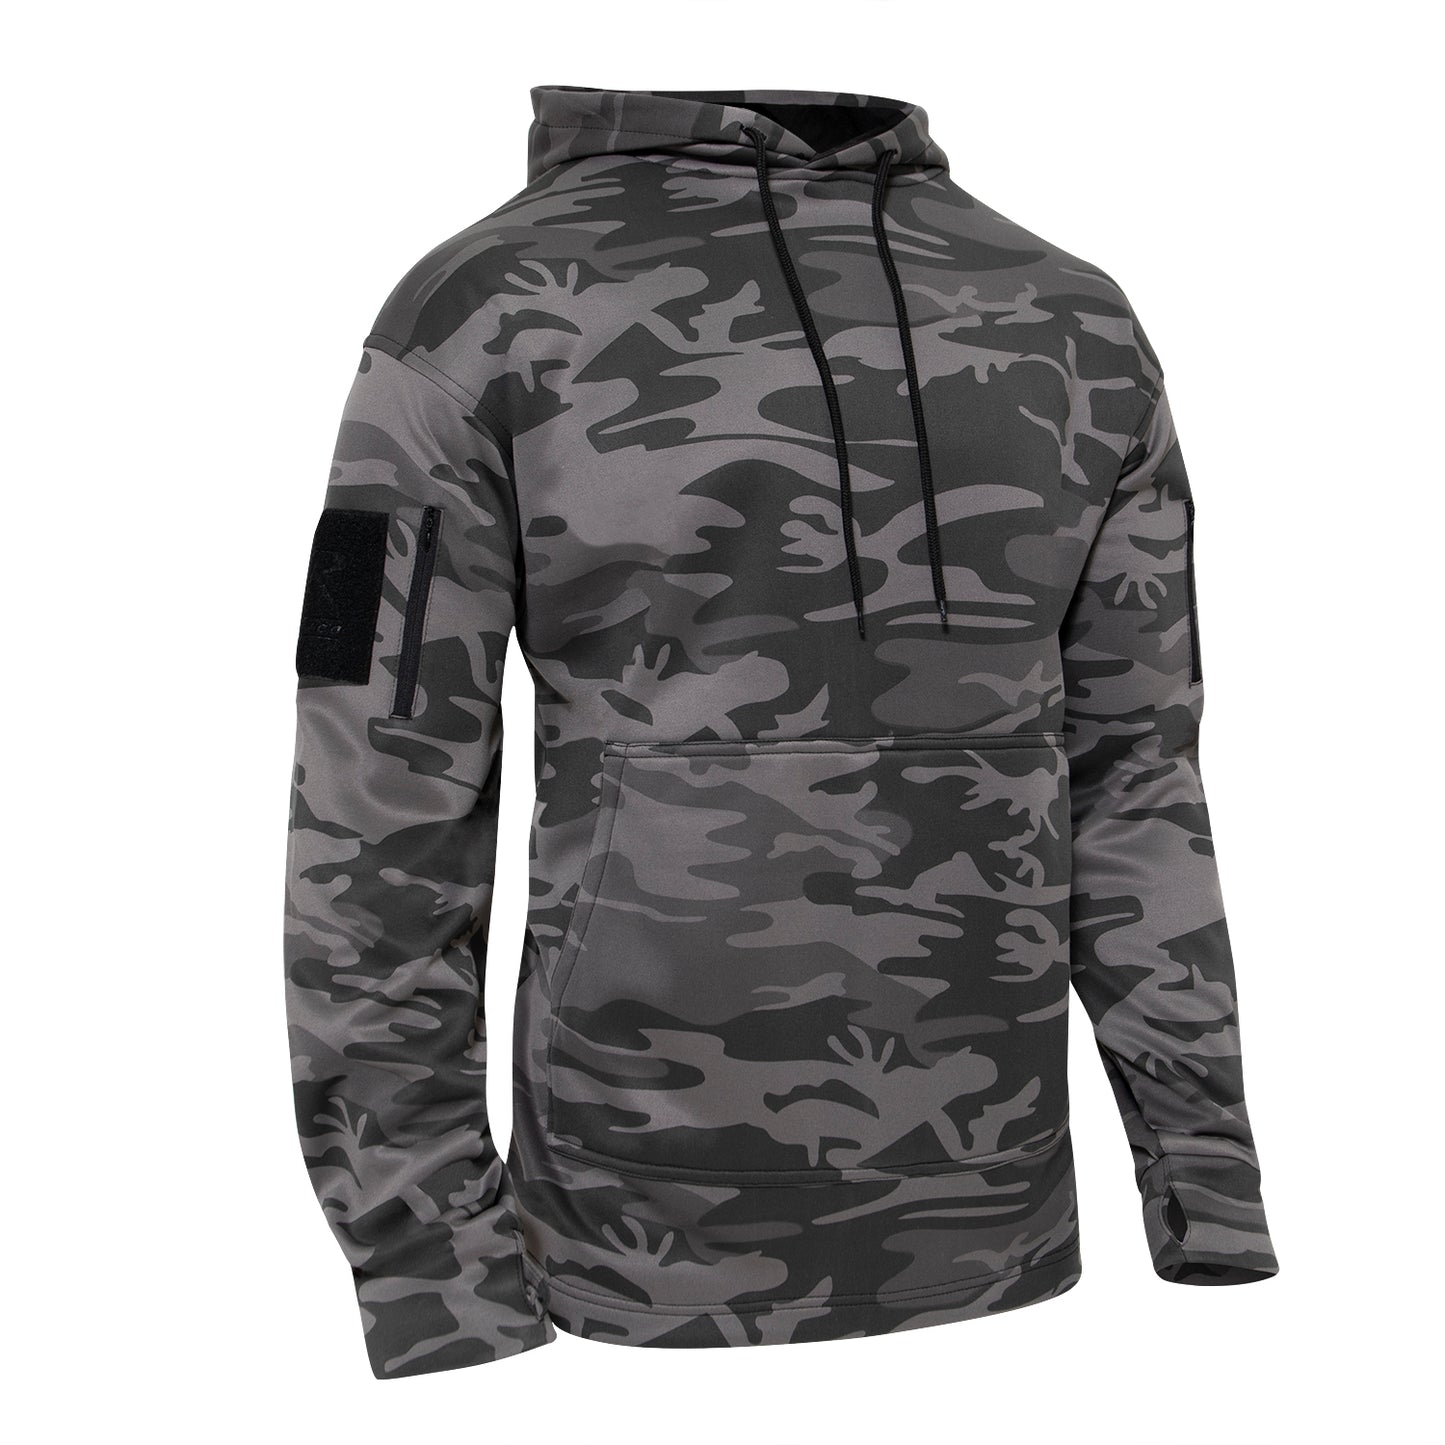 Men's Camouflage Concealed Carry Hoodies Tactical CCW Pullover Hooded Sweatshirt